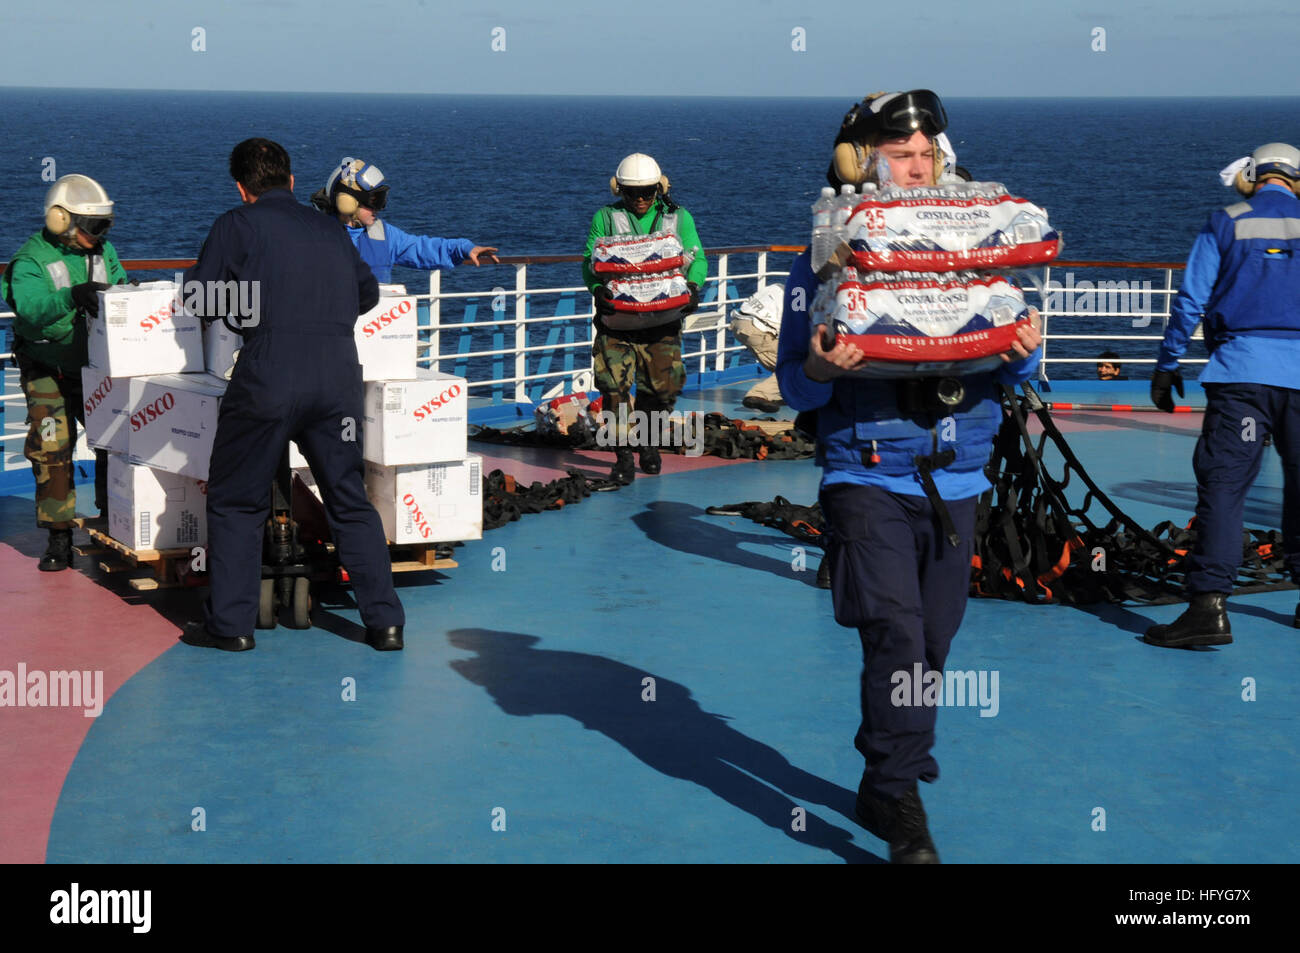 Sailors assigned to the aircraft carrier USS Ronald Reagan (CVN 76) help crew-members of Carnival cruise ship C/V Splendor unload food and water sent from Ronald Reagan. Ronald Reagan was diverted from its current training maneuvers at the direction of Commander U.S. Third Fleet, and at the request of the U.S. Coast Guard, to a position south near the Carnival cruise ship C/V Splendor to facilitate the delivery of 4,500 pounds of supplies to the cruise ship. Early Monday, CV Splendor reported it was dead in the water 150 nautical miles southwest of San Diego. (Photo by: Petty Officer 3rd Class Stock Photo